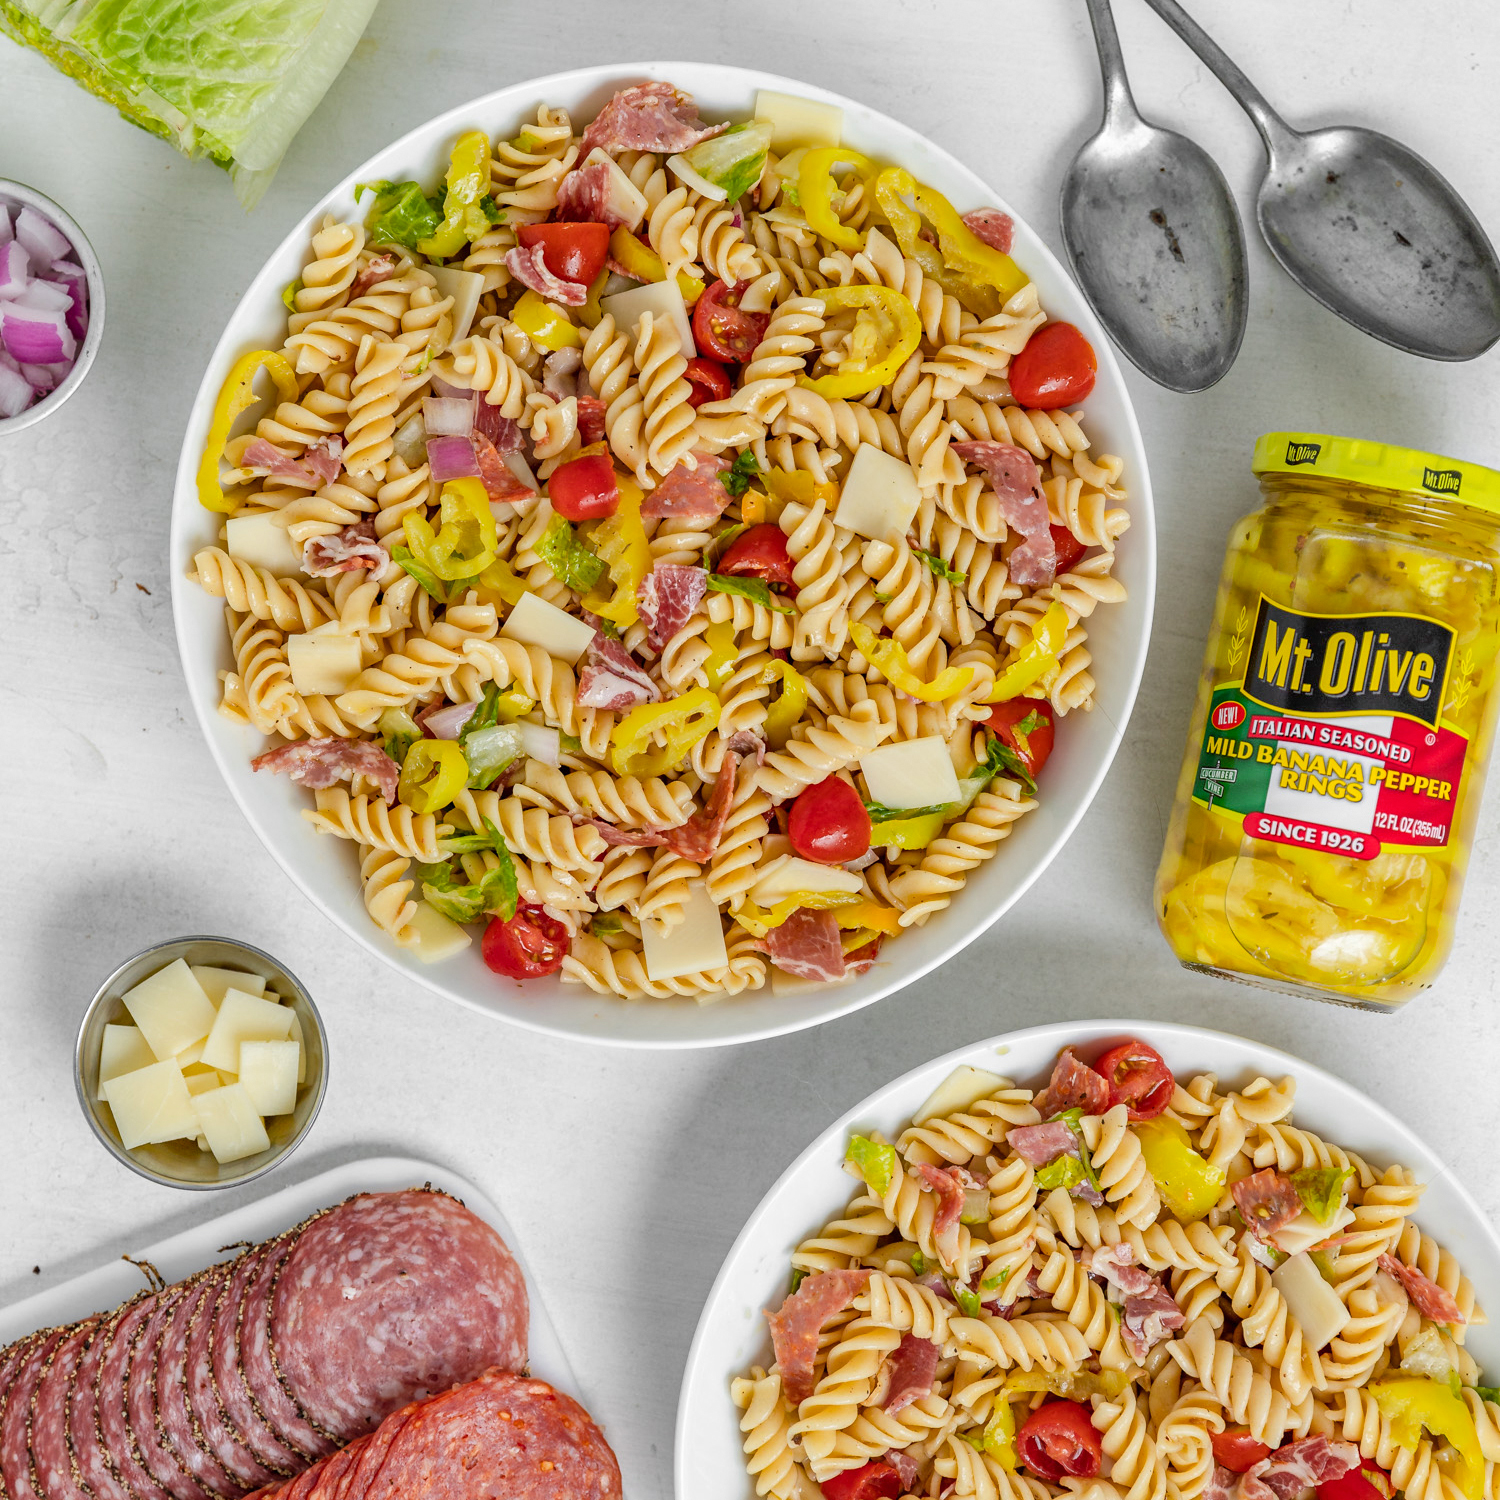 two white bowls filled with pasta salad, tomatoes, banana peppers, cheese and salami. jar of Italian Seasoned Banana Peppers shown.